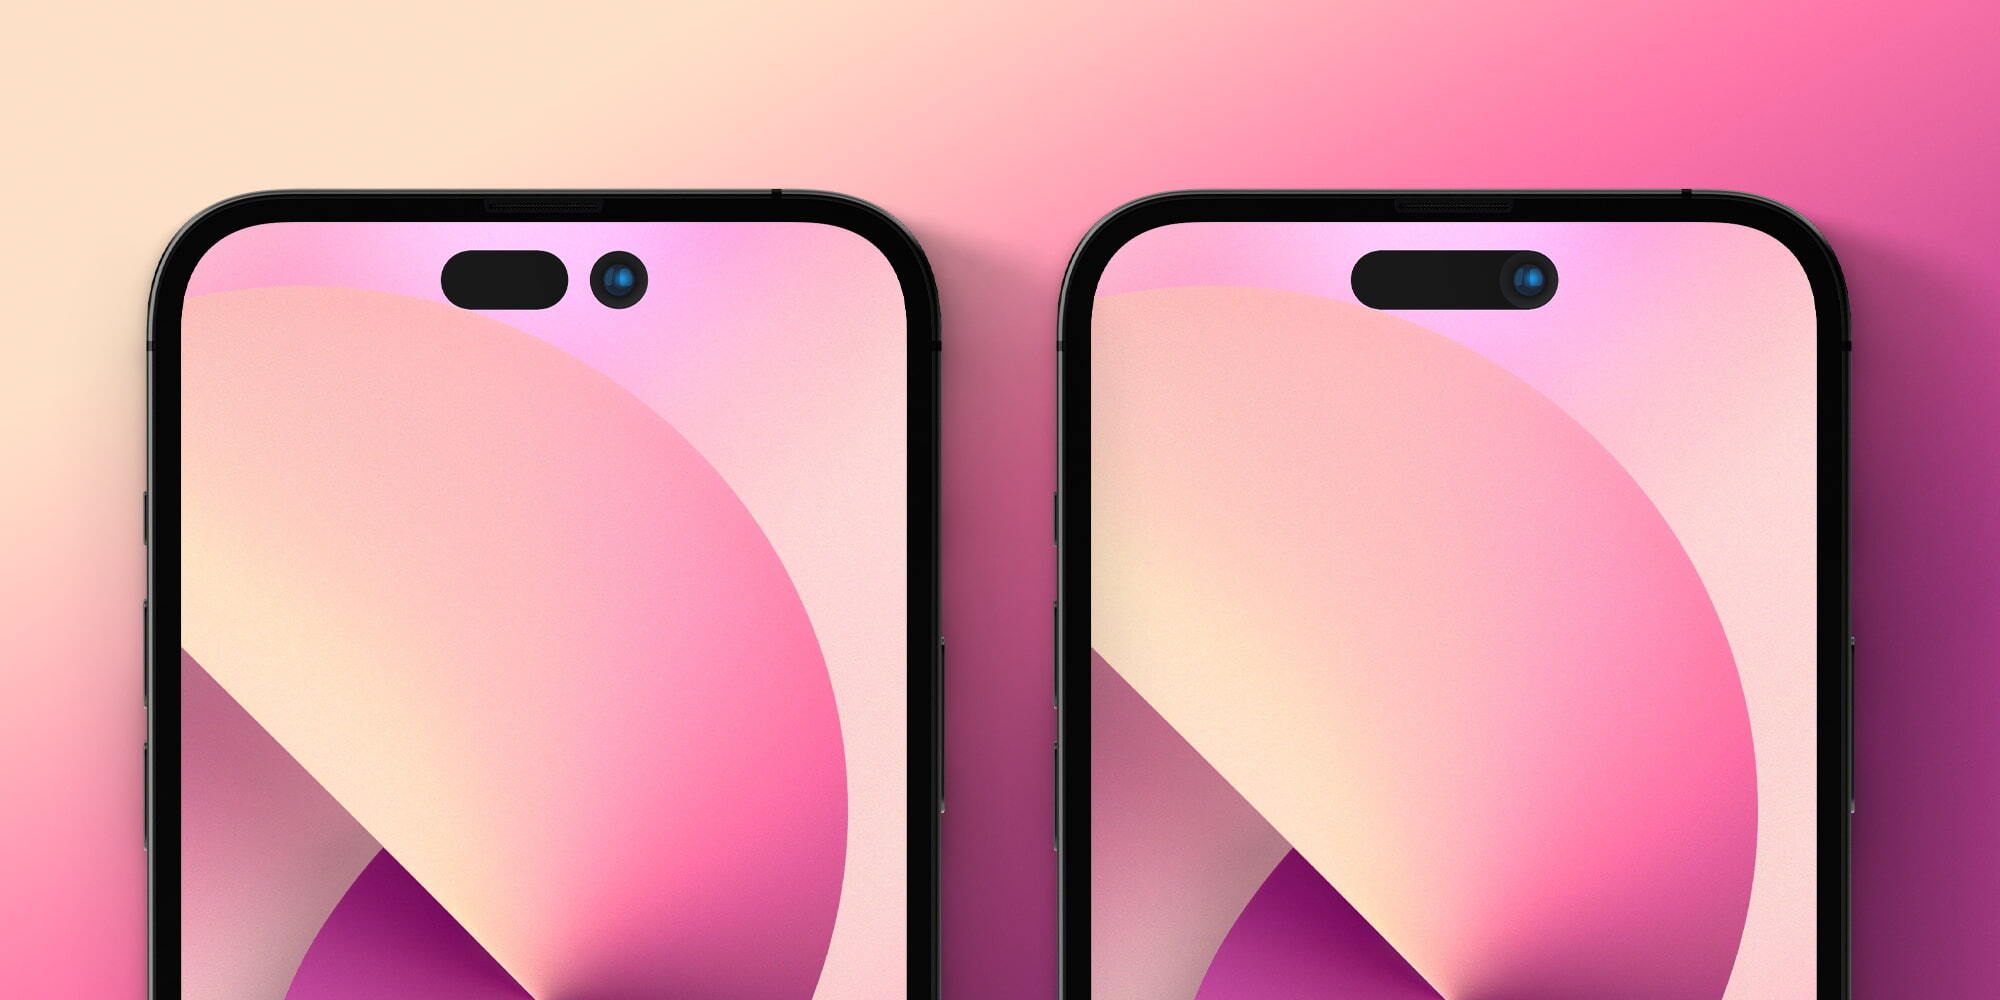 These Samsung Wallpapers Hide the Galaxy Note 10 Notch — Take a Look